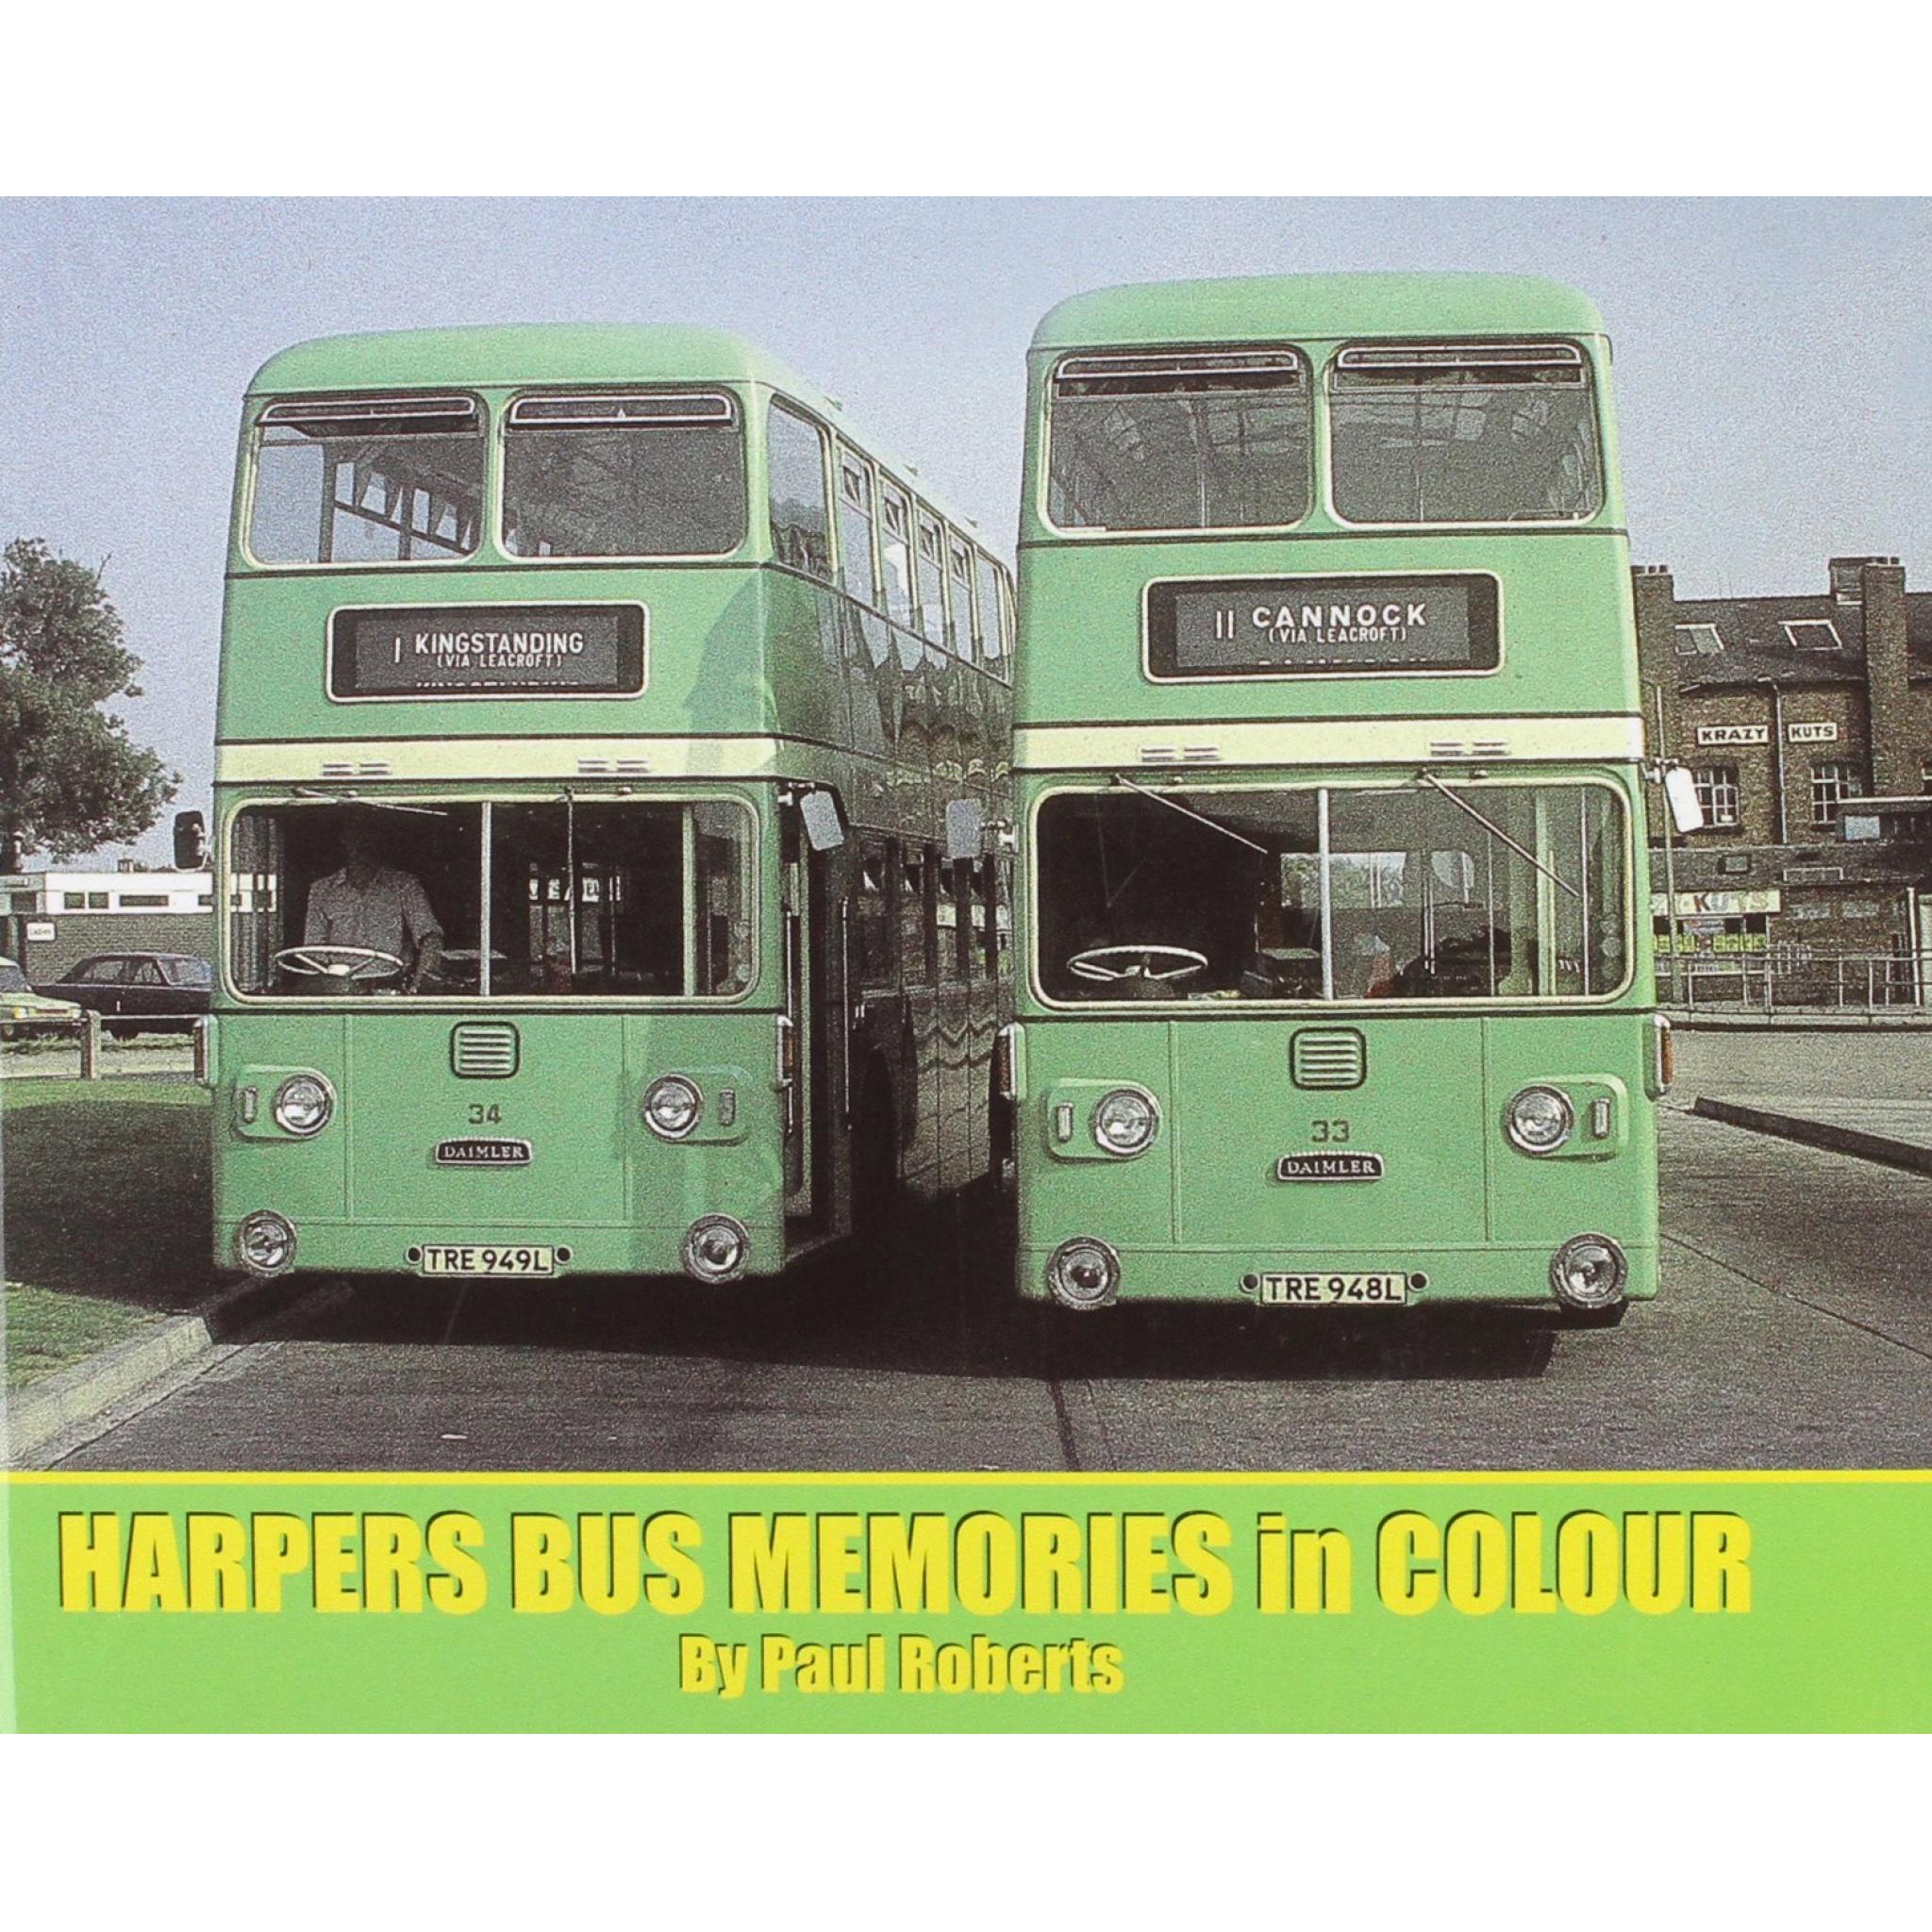 50%+ OFF RRP is £12.95  Harpers Bus Memories in Colour